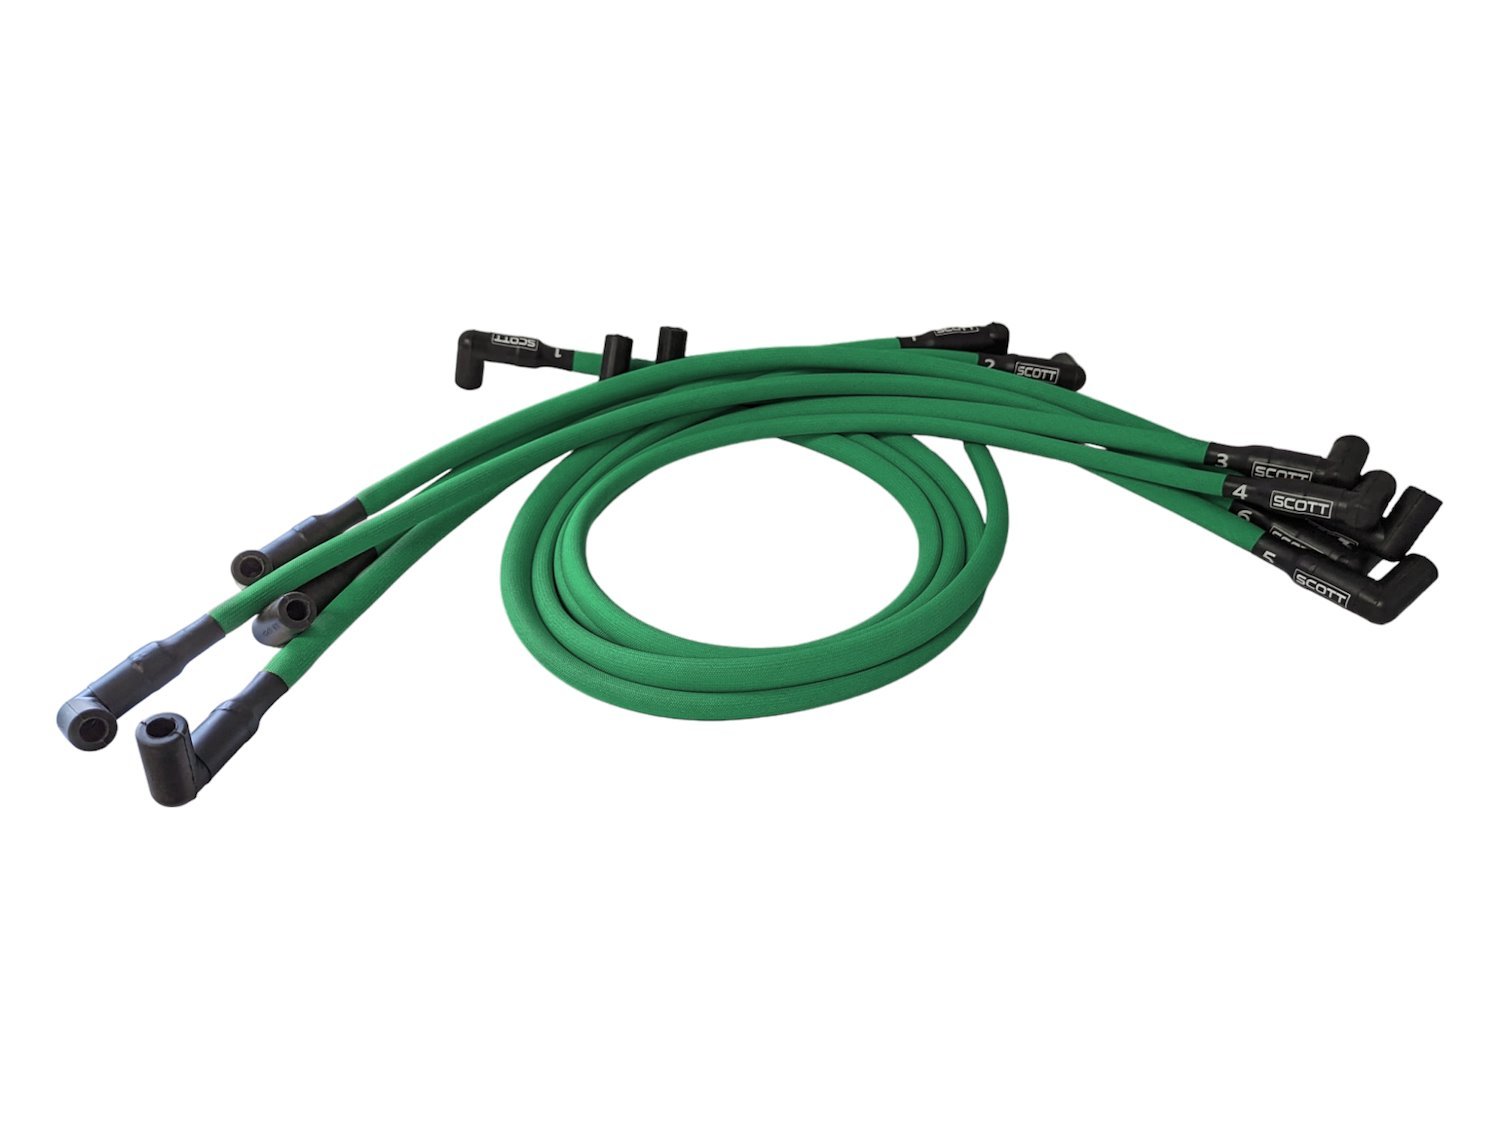 SPW300-PS-416-4 Super Mag Fiberglass-Oversleeved Spark Plug Wire Set for Big Block Chevy, Under Header [Green]